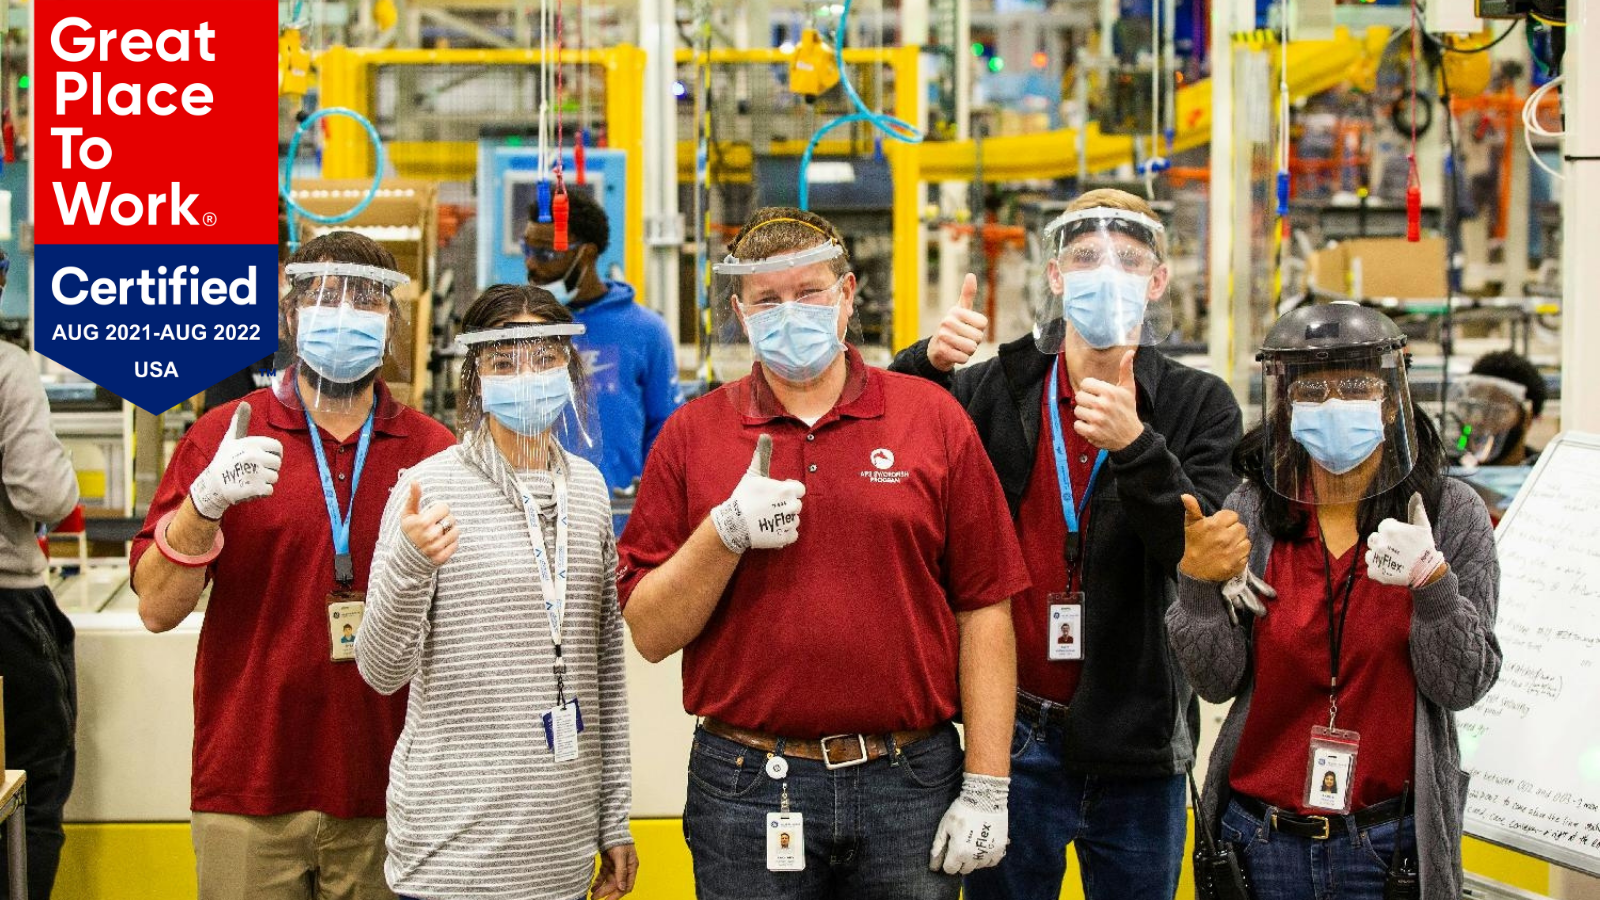 Employees wearing PPE in plant gather with thumbs up